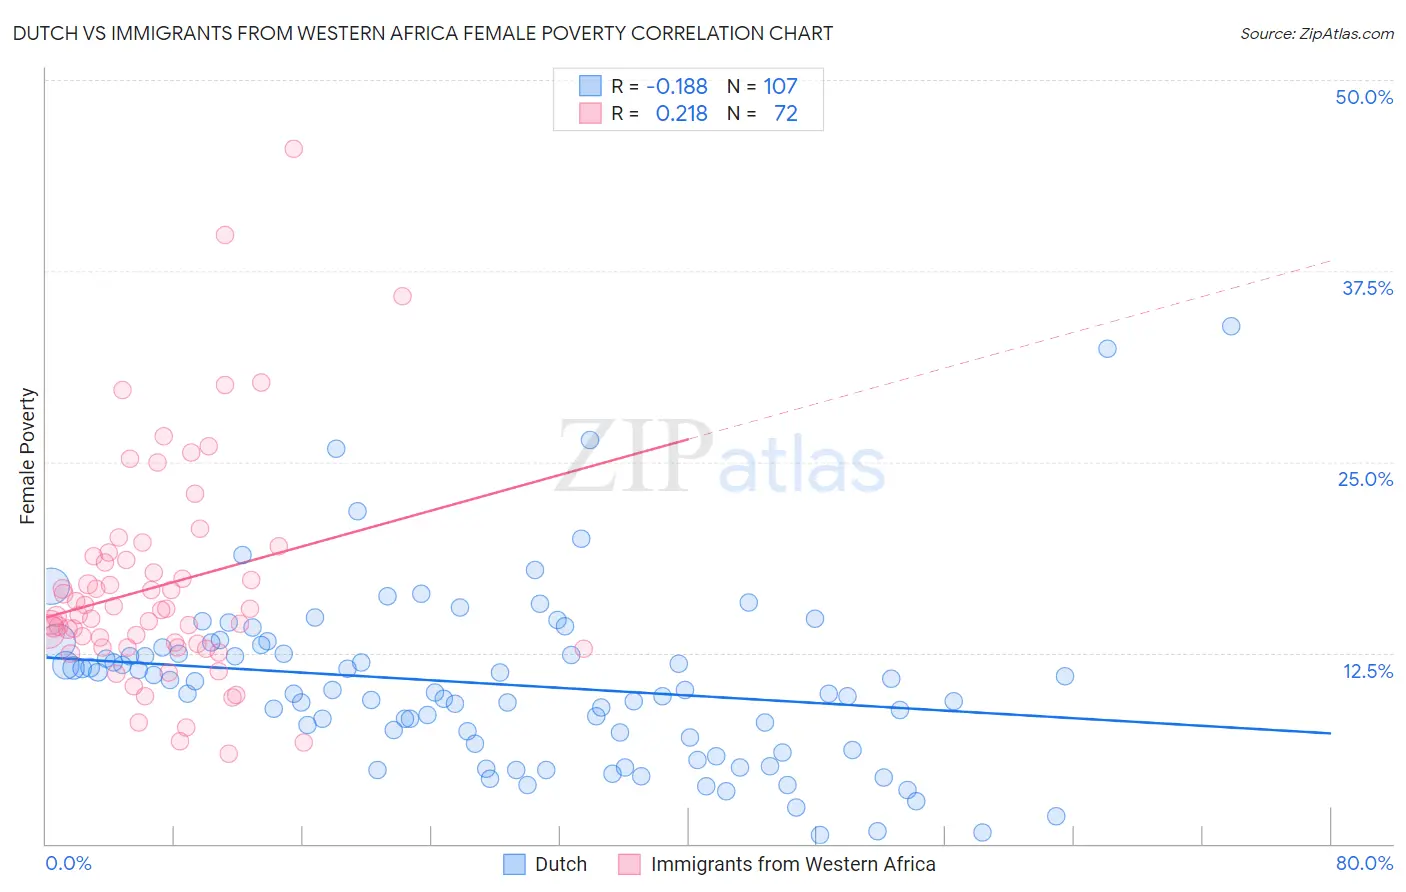 Dutch vs Immigrants from Western Africa Female Poverty